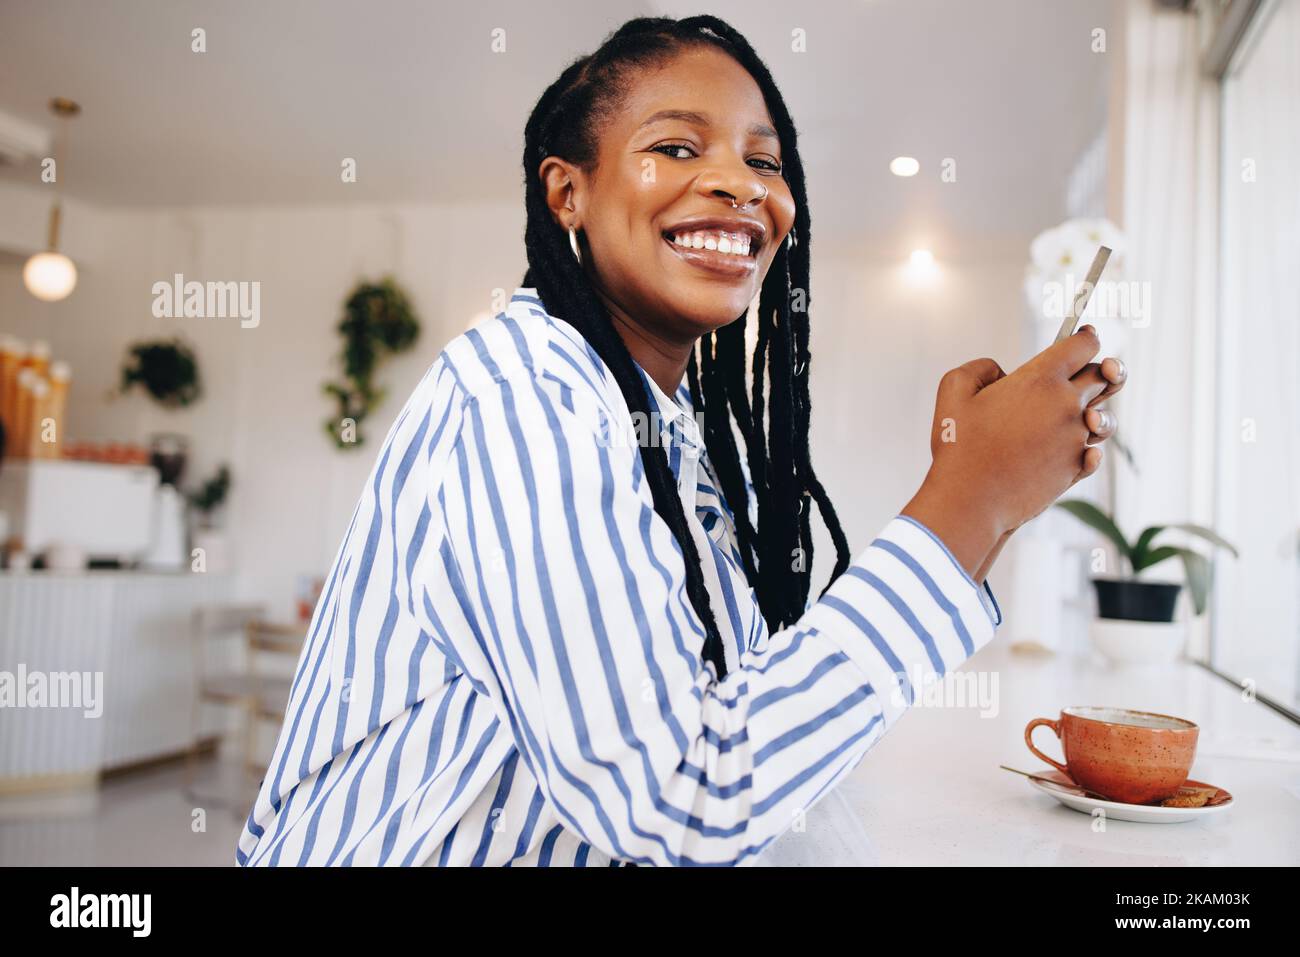 Happy young businesswoman smiling at the camera while holding a smartphone in a coffee shop. Cheerful young black businesswoman taking a coffee break Stock Photo